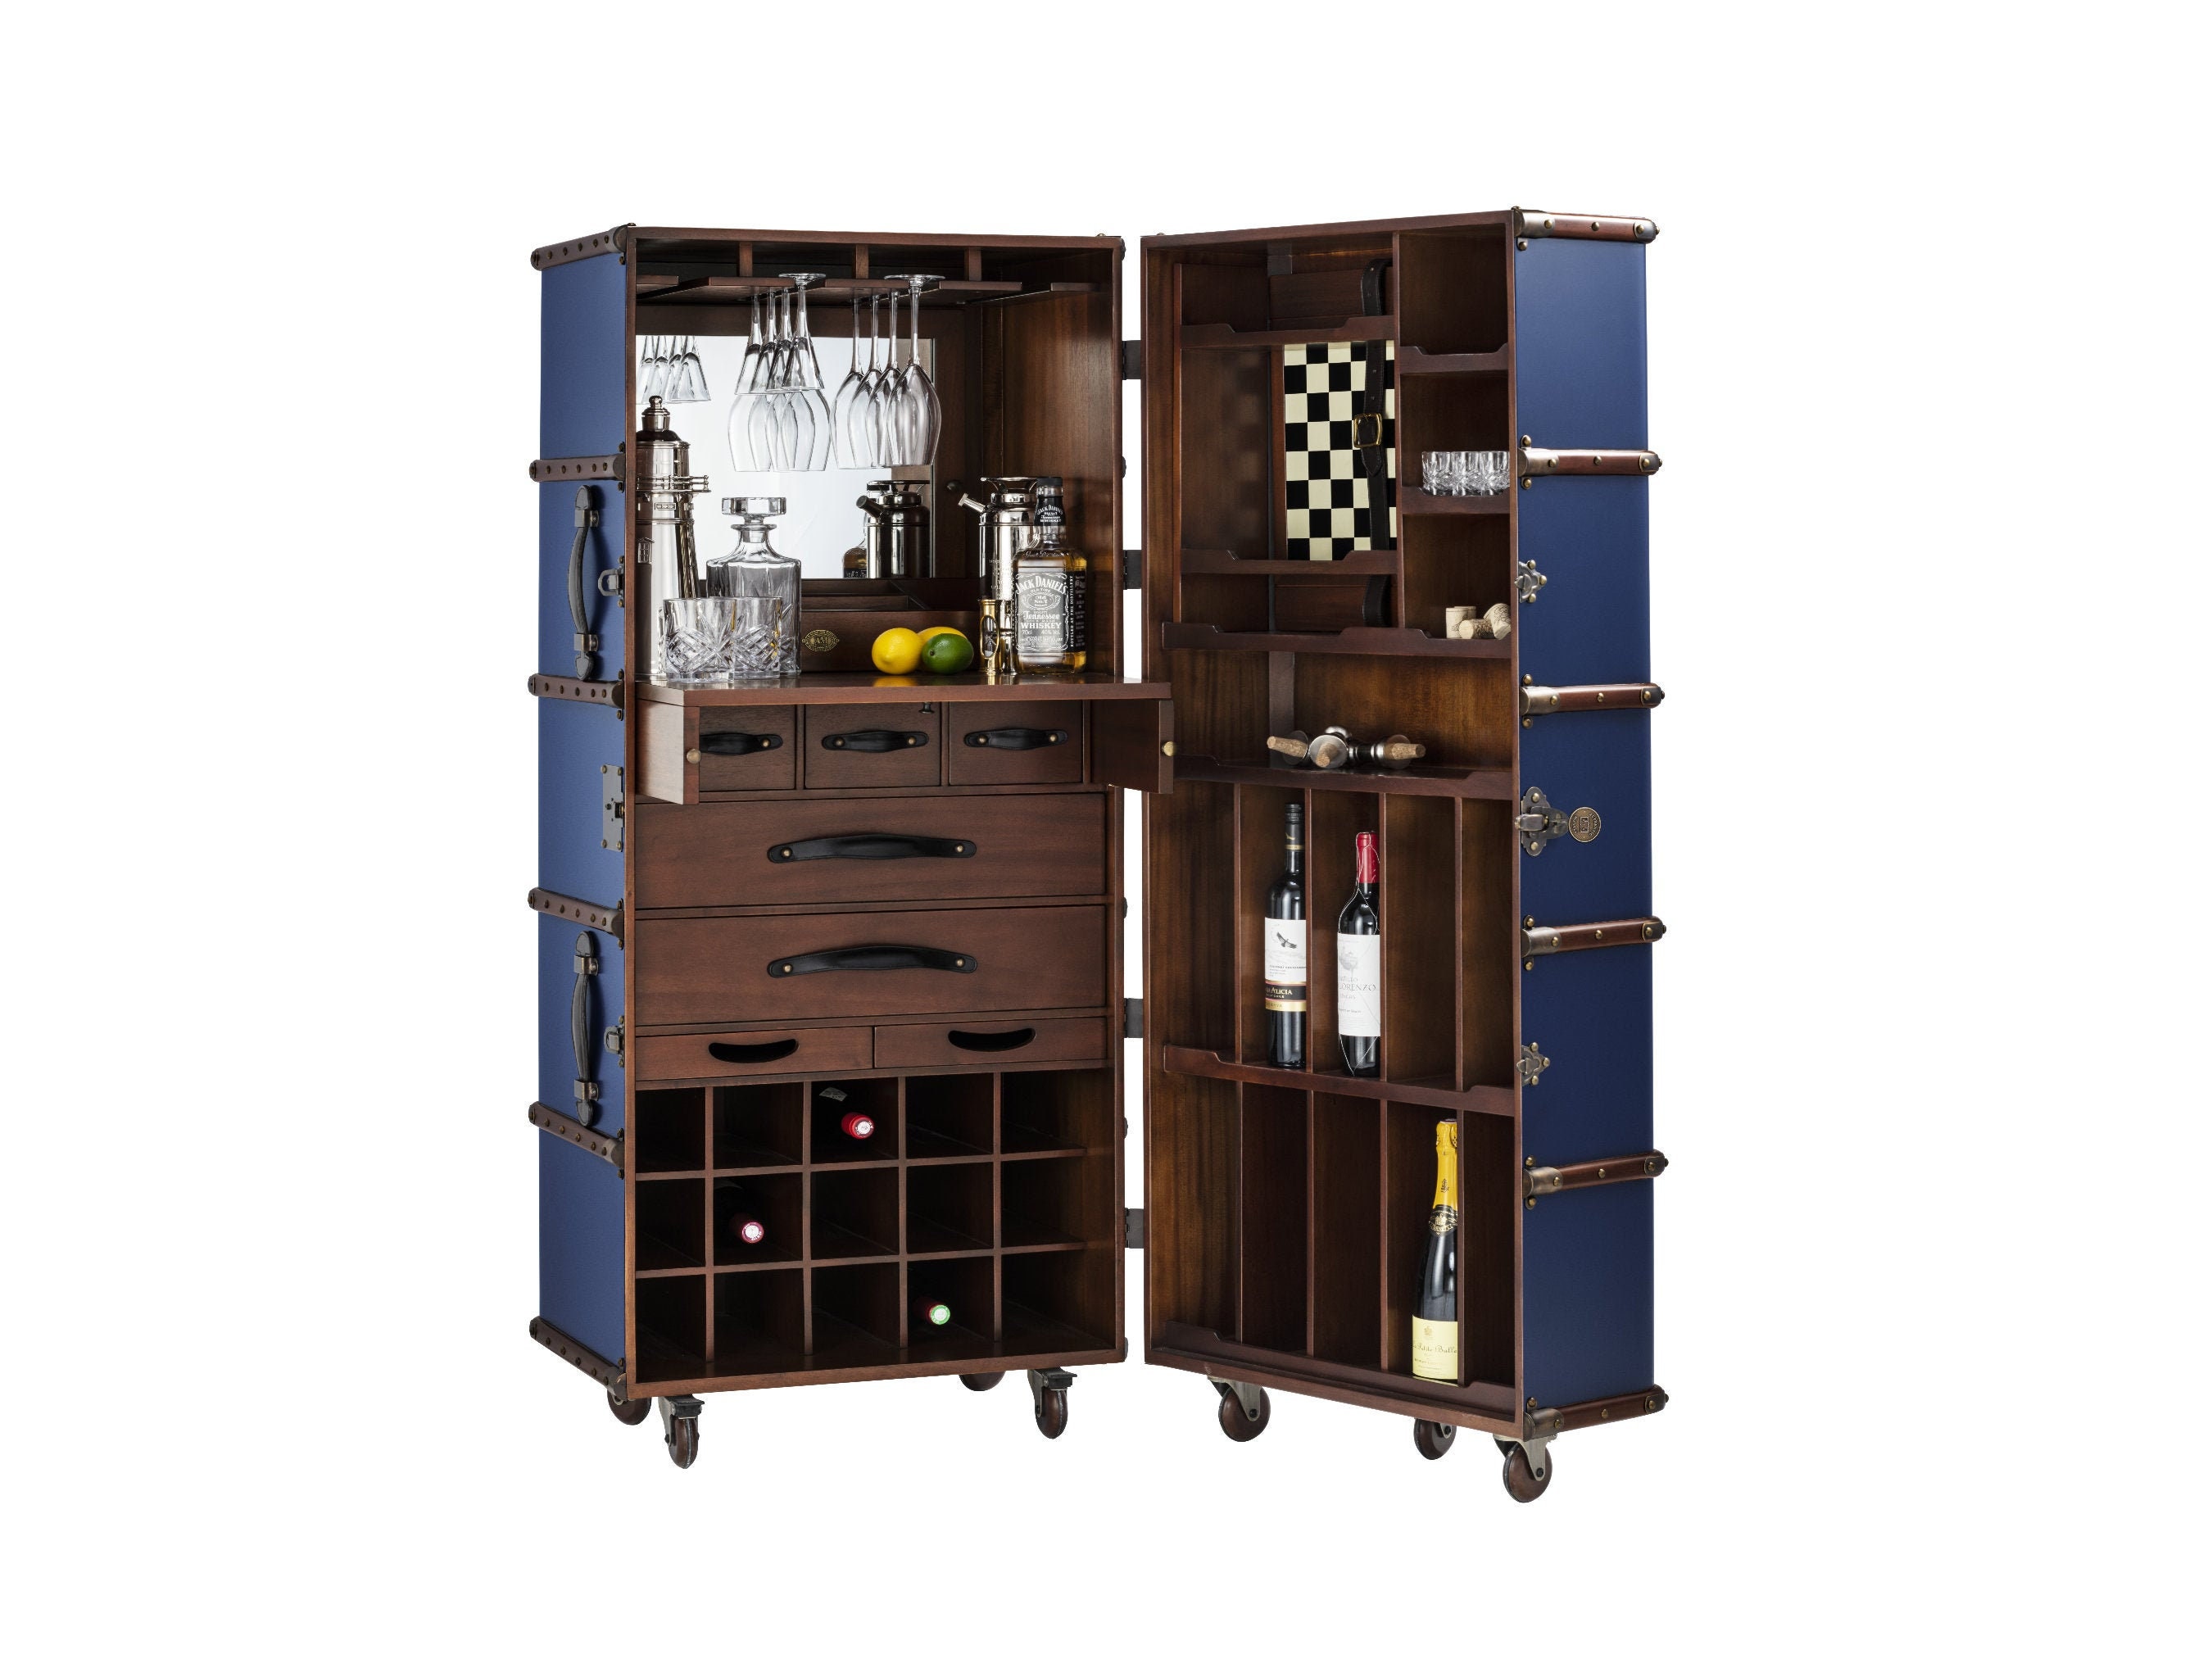 Store All Your Liquor in This Cocktail Bar Steamer Trunk